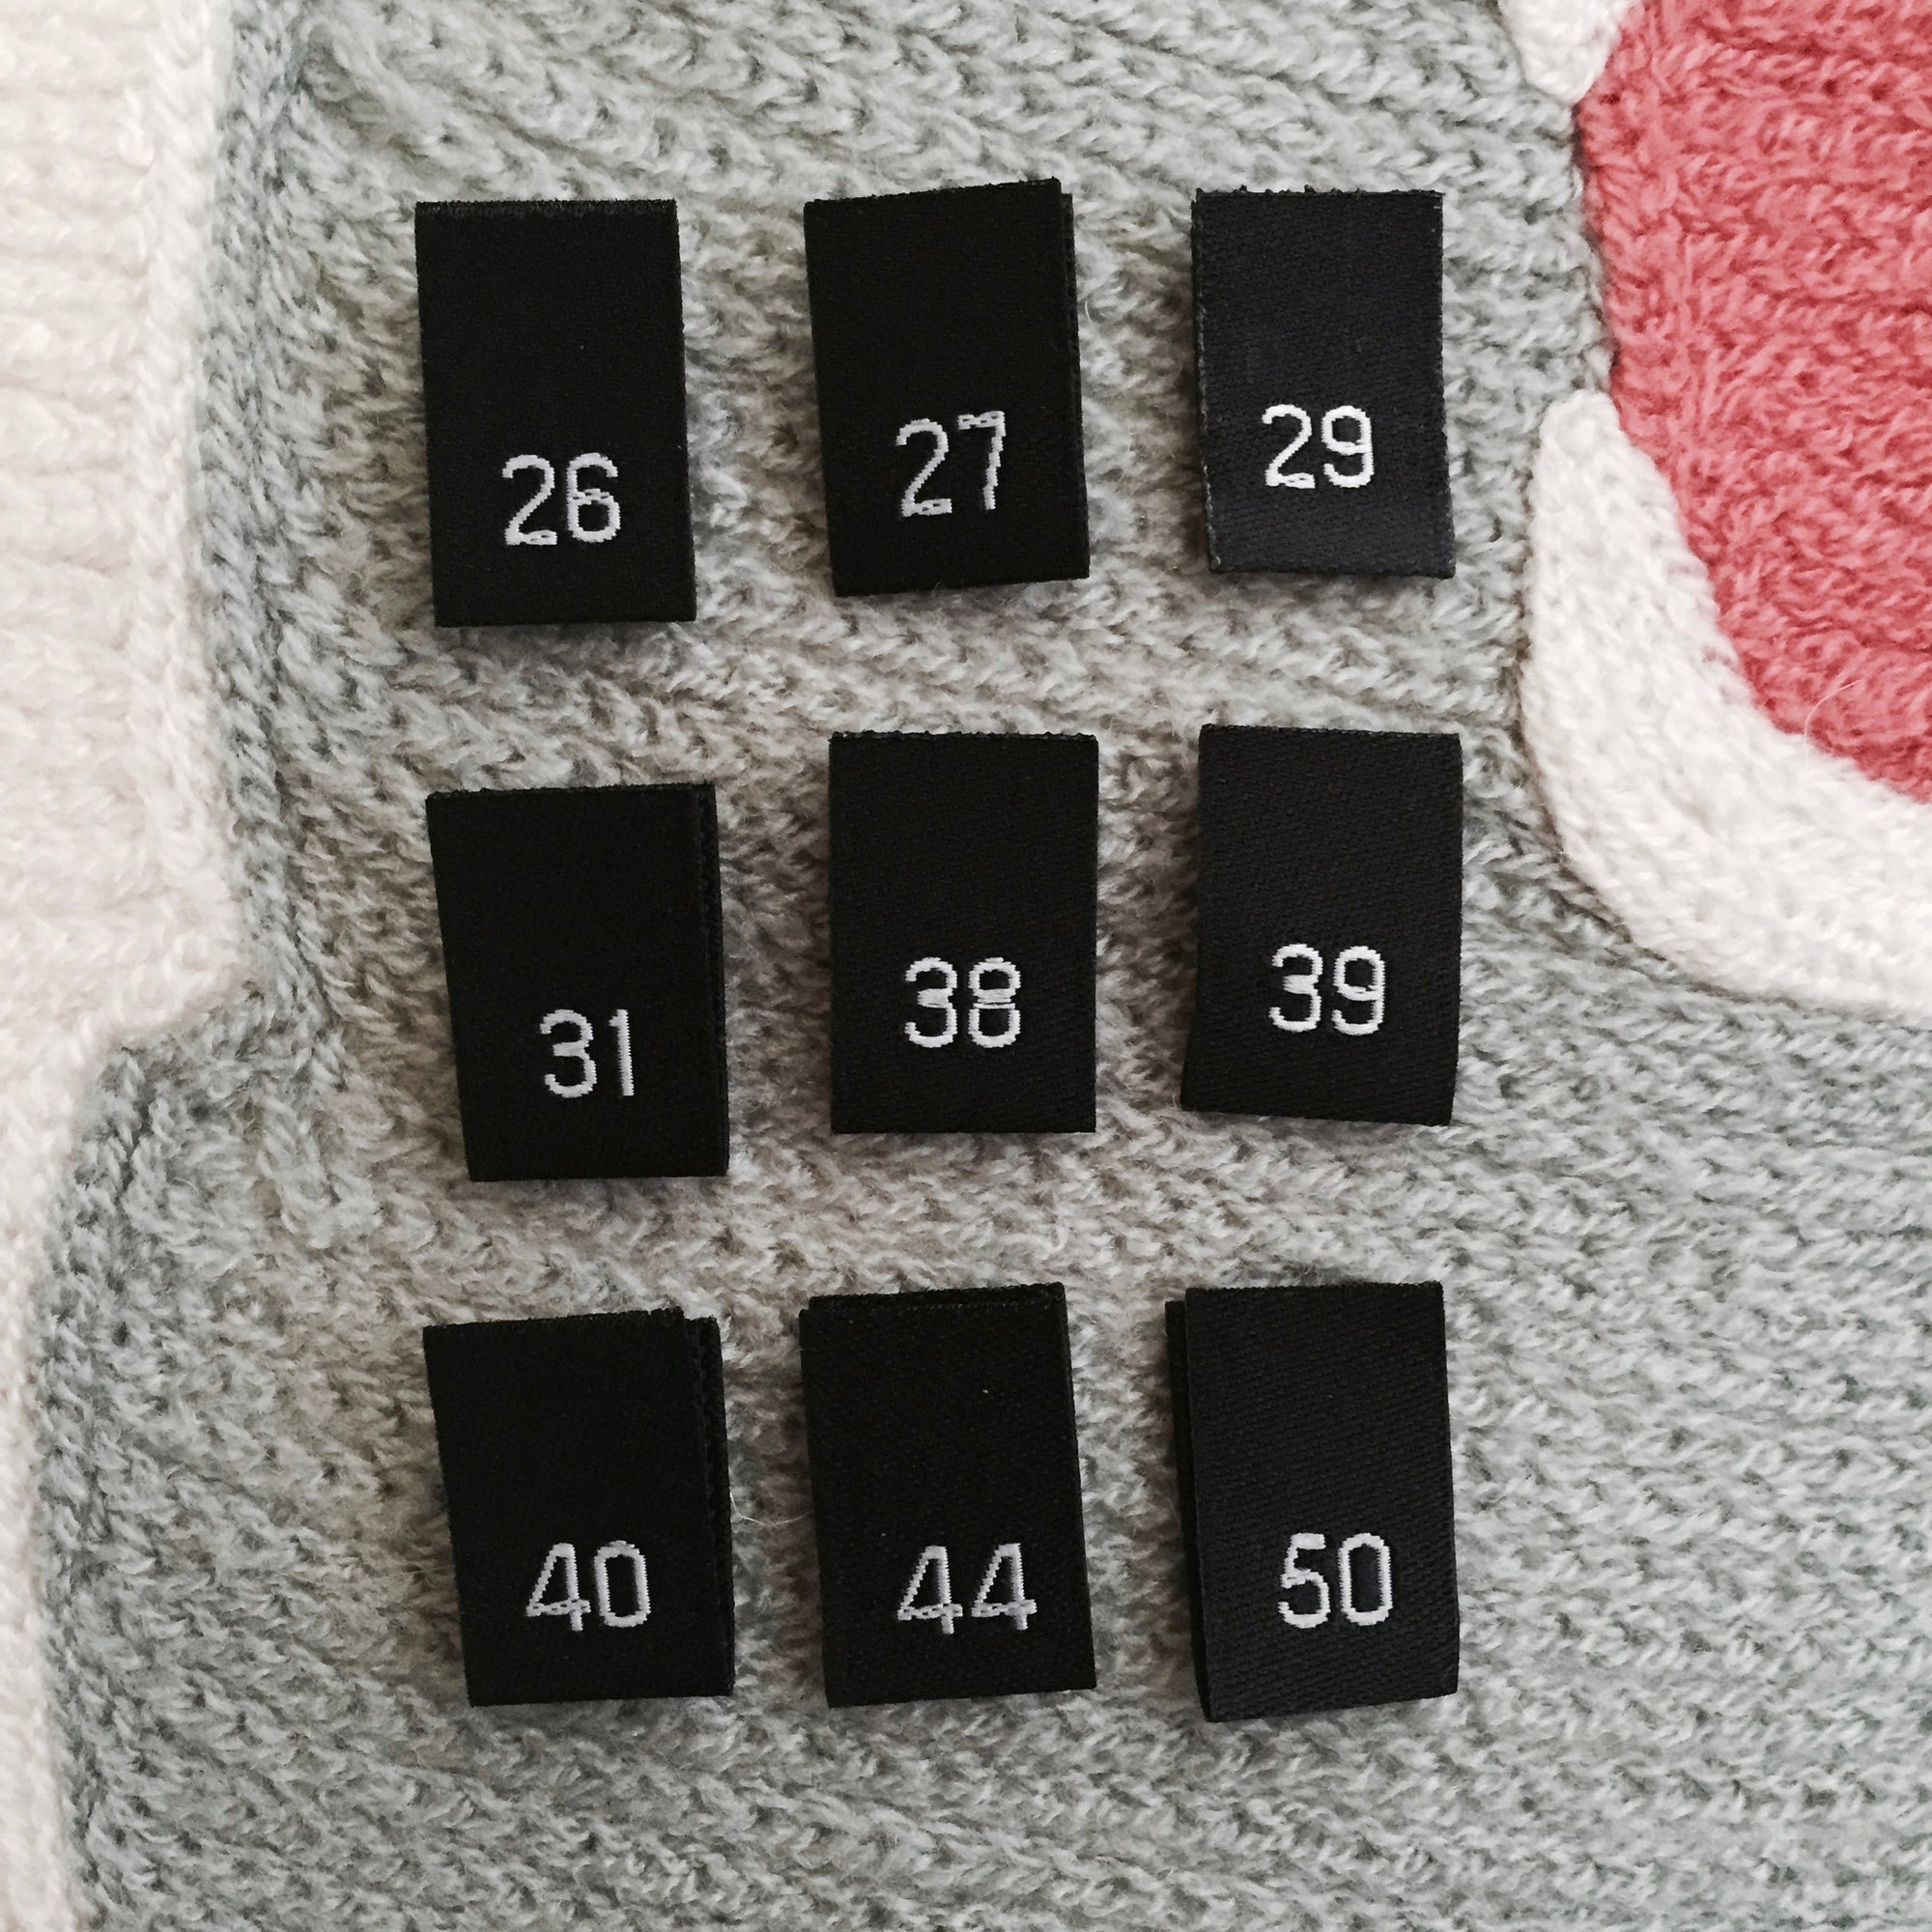 250 PCS WOVEN CLOTHING LABELS BLACK MADE IN USA - SIZE TAGS XS, S, M, L,  XL, XXL